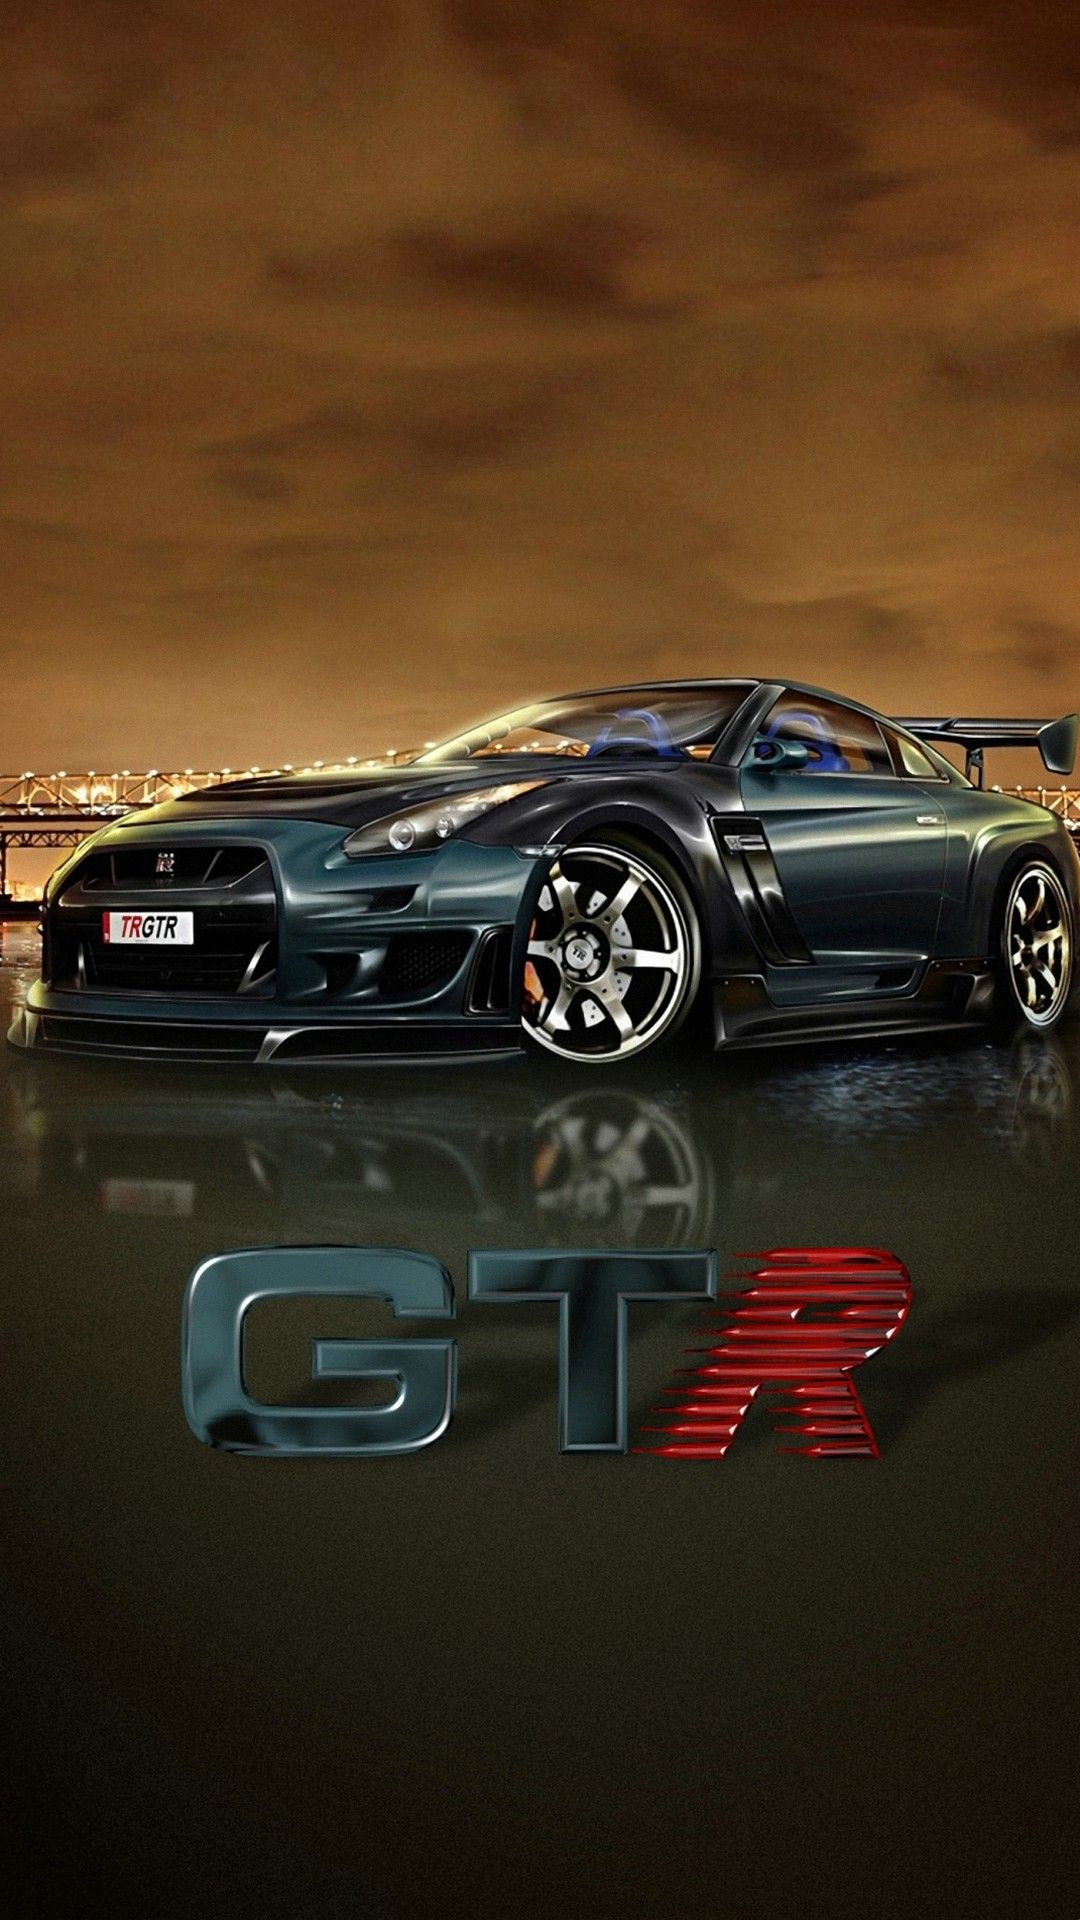 GTR Android Wallpaper Android Wallpaper